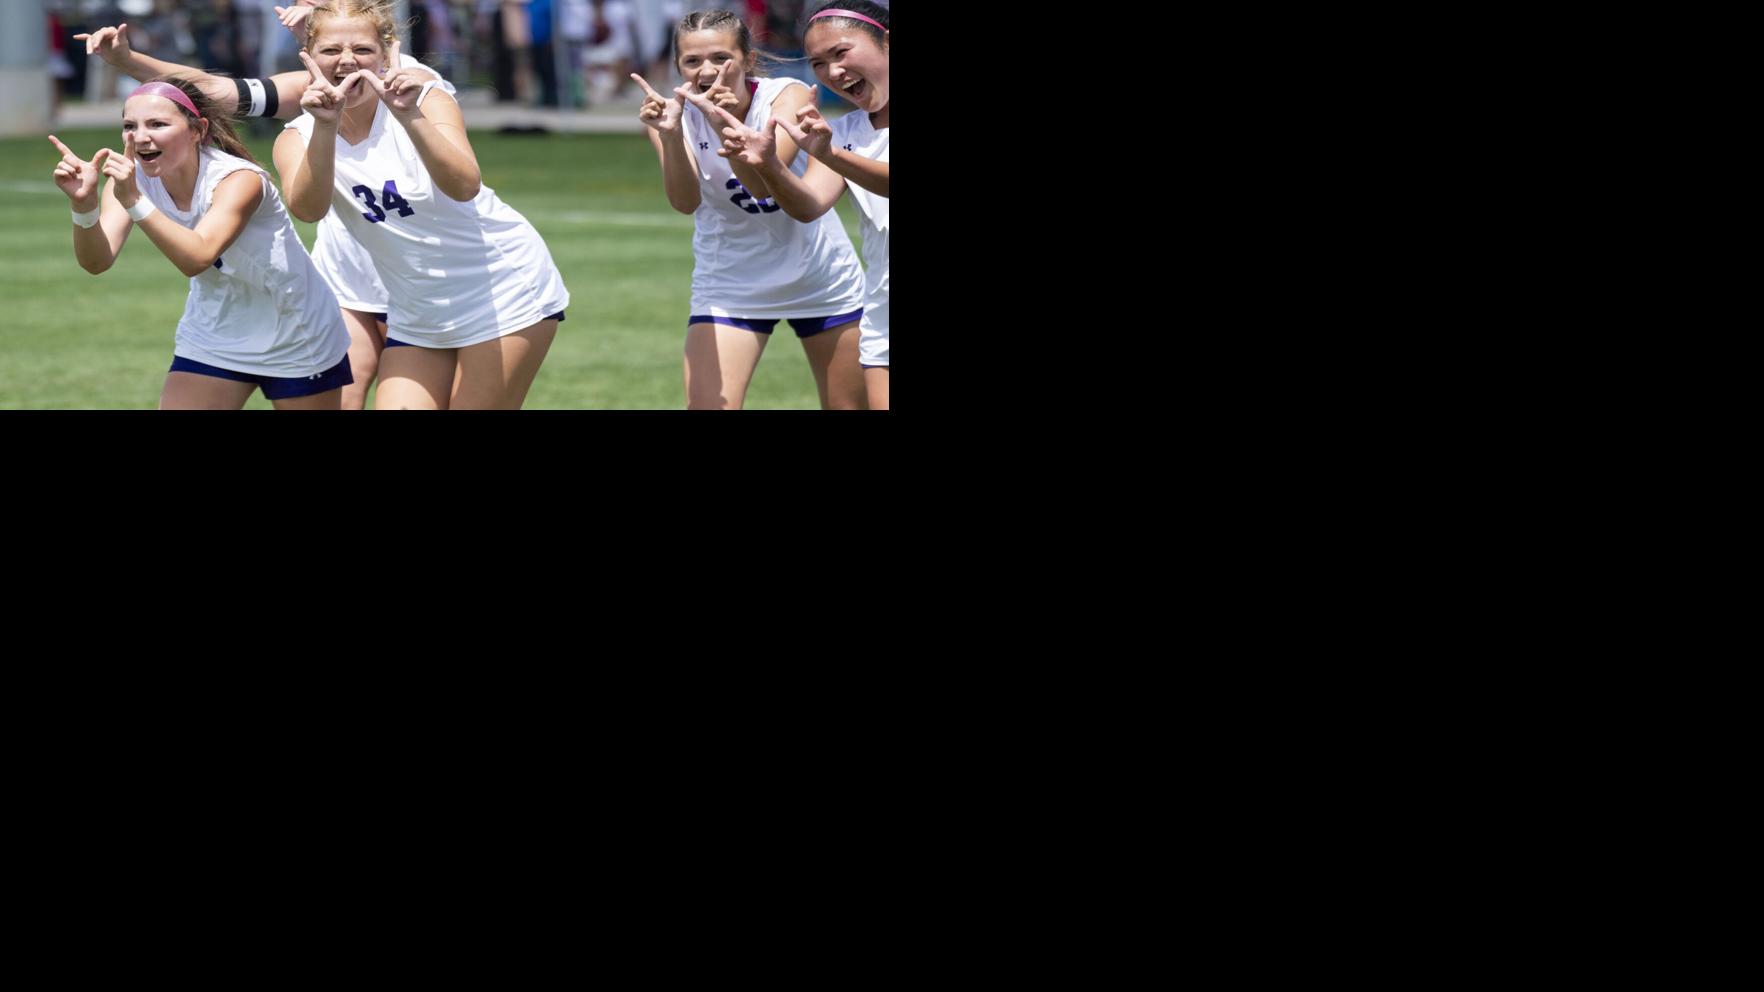 Photos: Springville claims back-to-back state titles - girls soccer